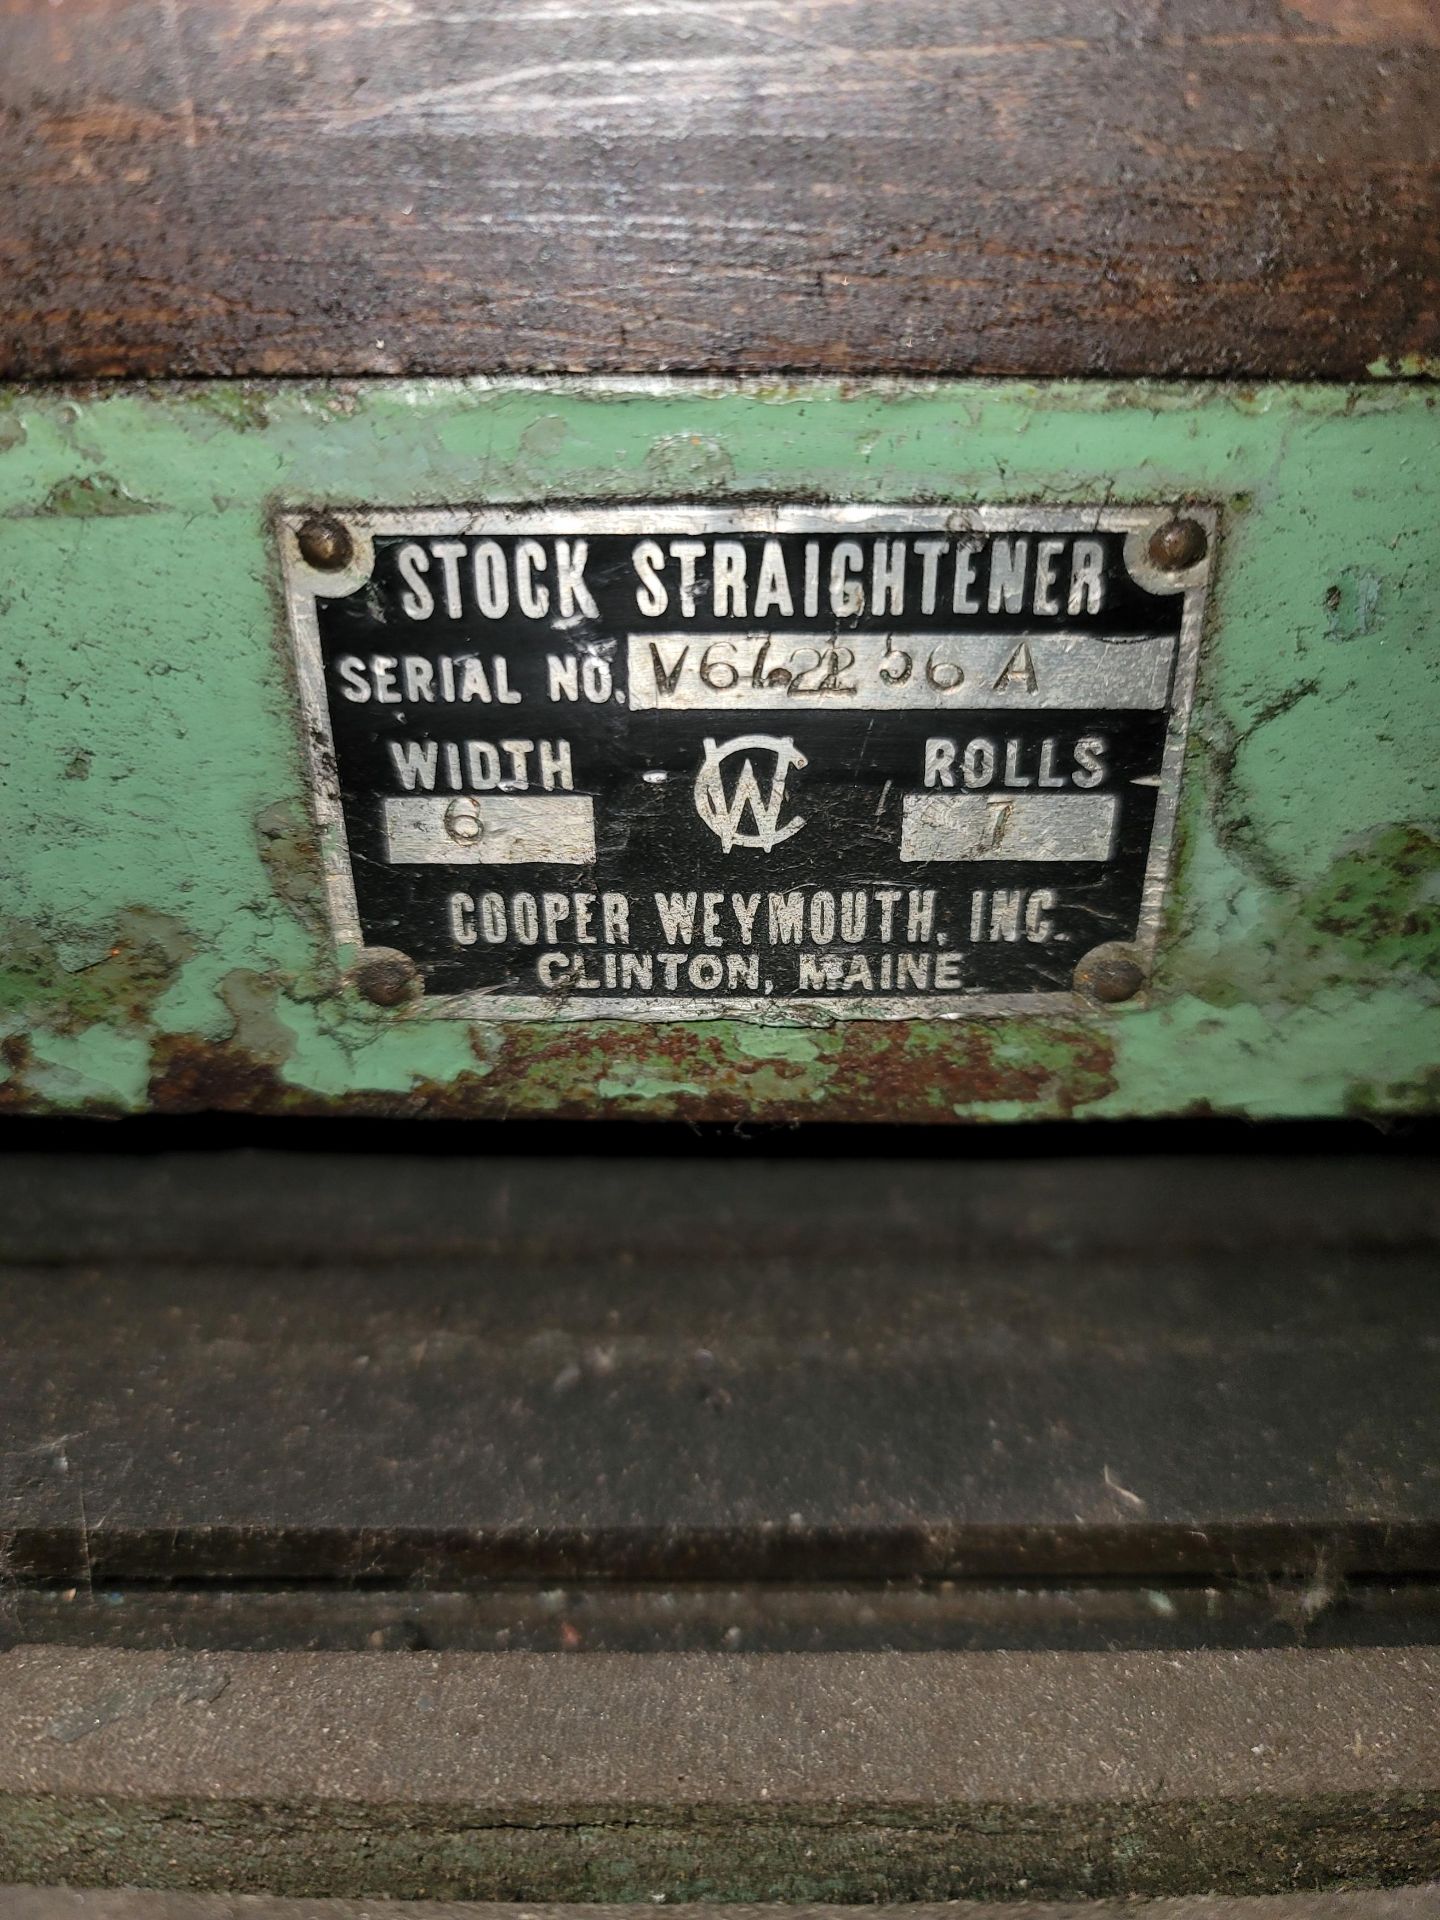 COOPER WEYMOUTH STOCK STRAIGHTENER, 6" WIDTH, S/N V67.2256A - Image 4 of 4